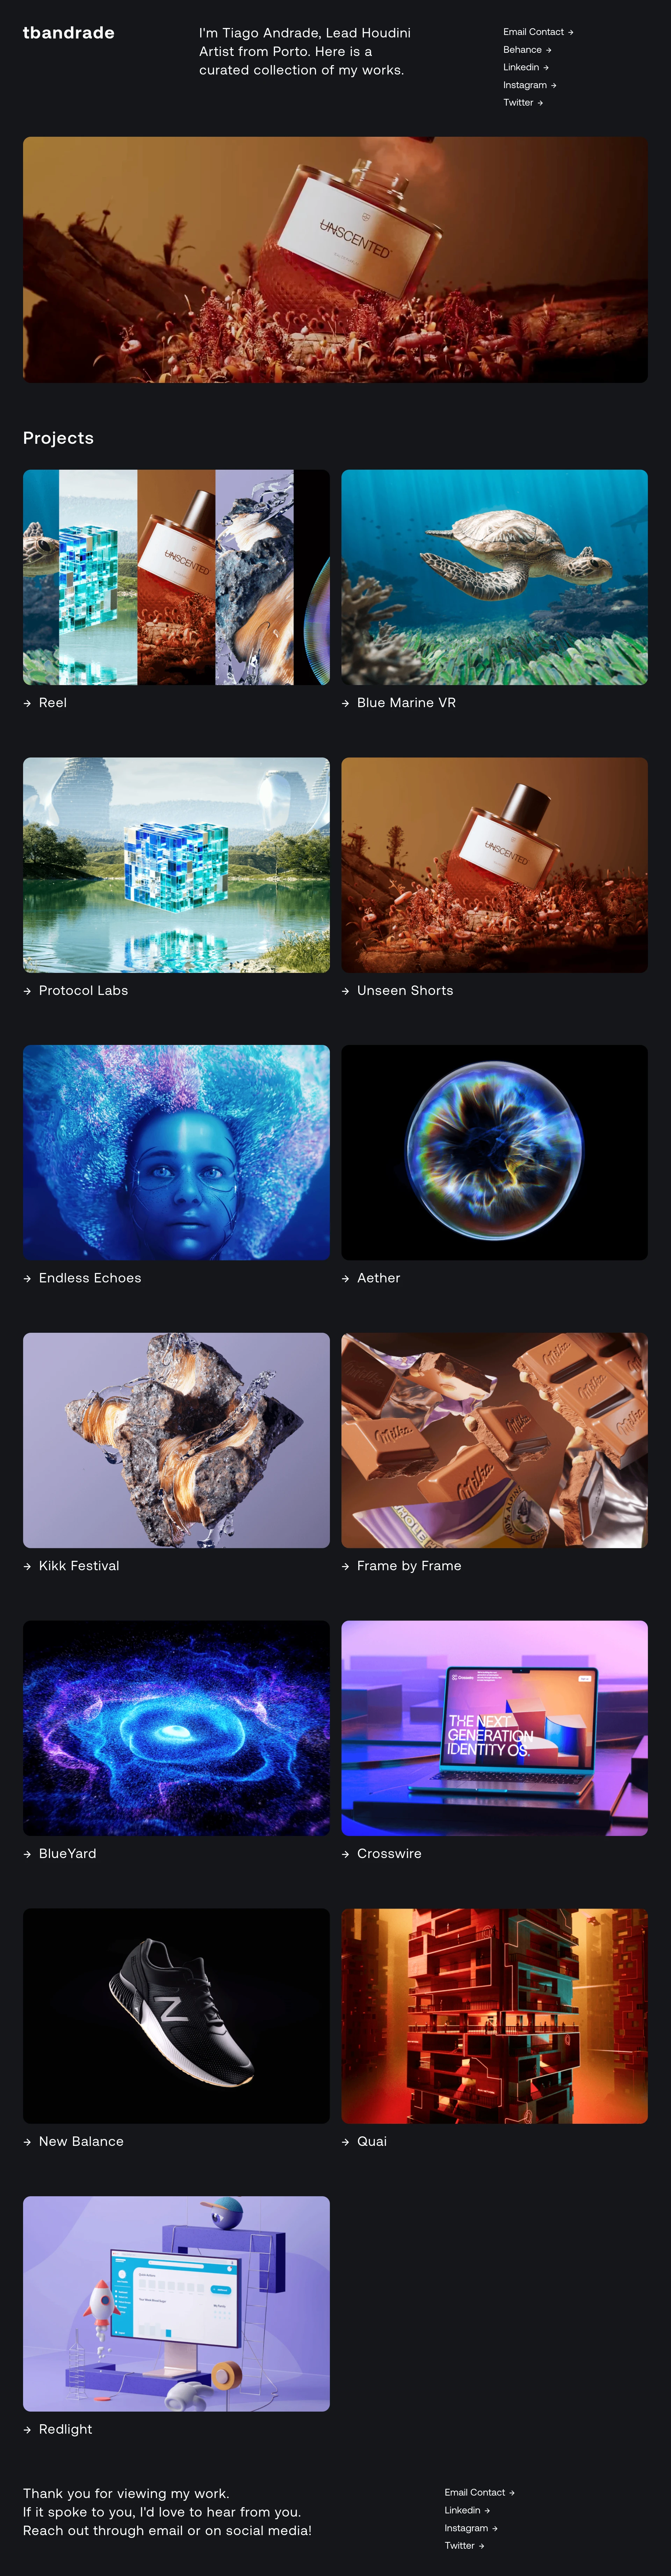 Tiago Andrade Landing Page Example: I'm Tiago Andrade, Lead Houdini Artist from Porto. Here is a curated collection of my works.